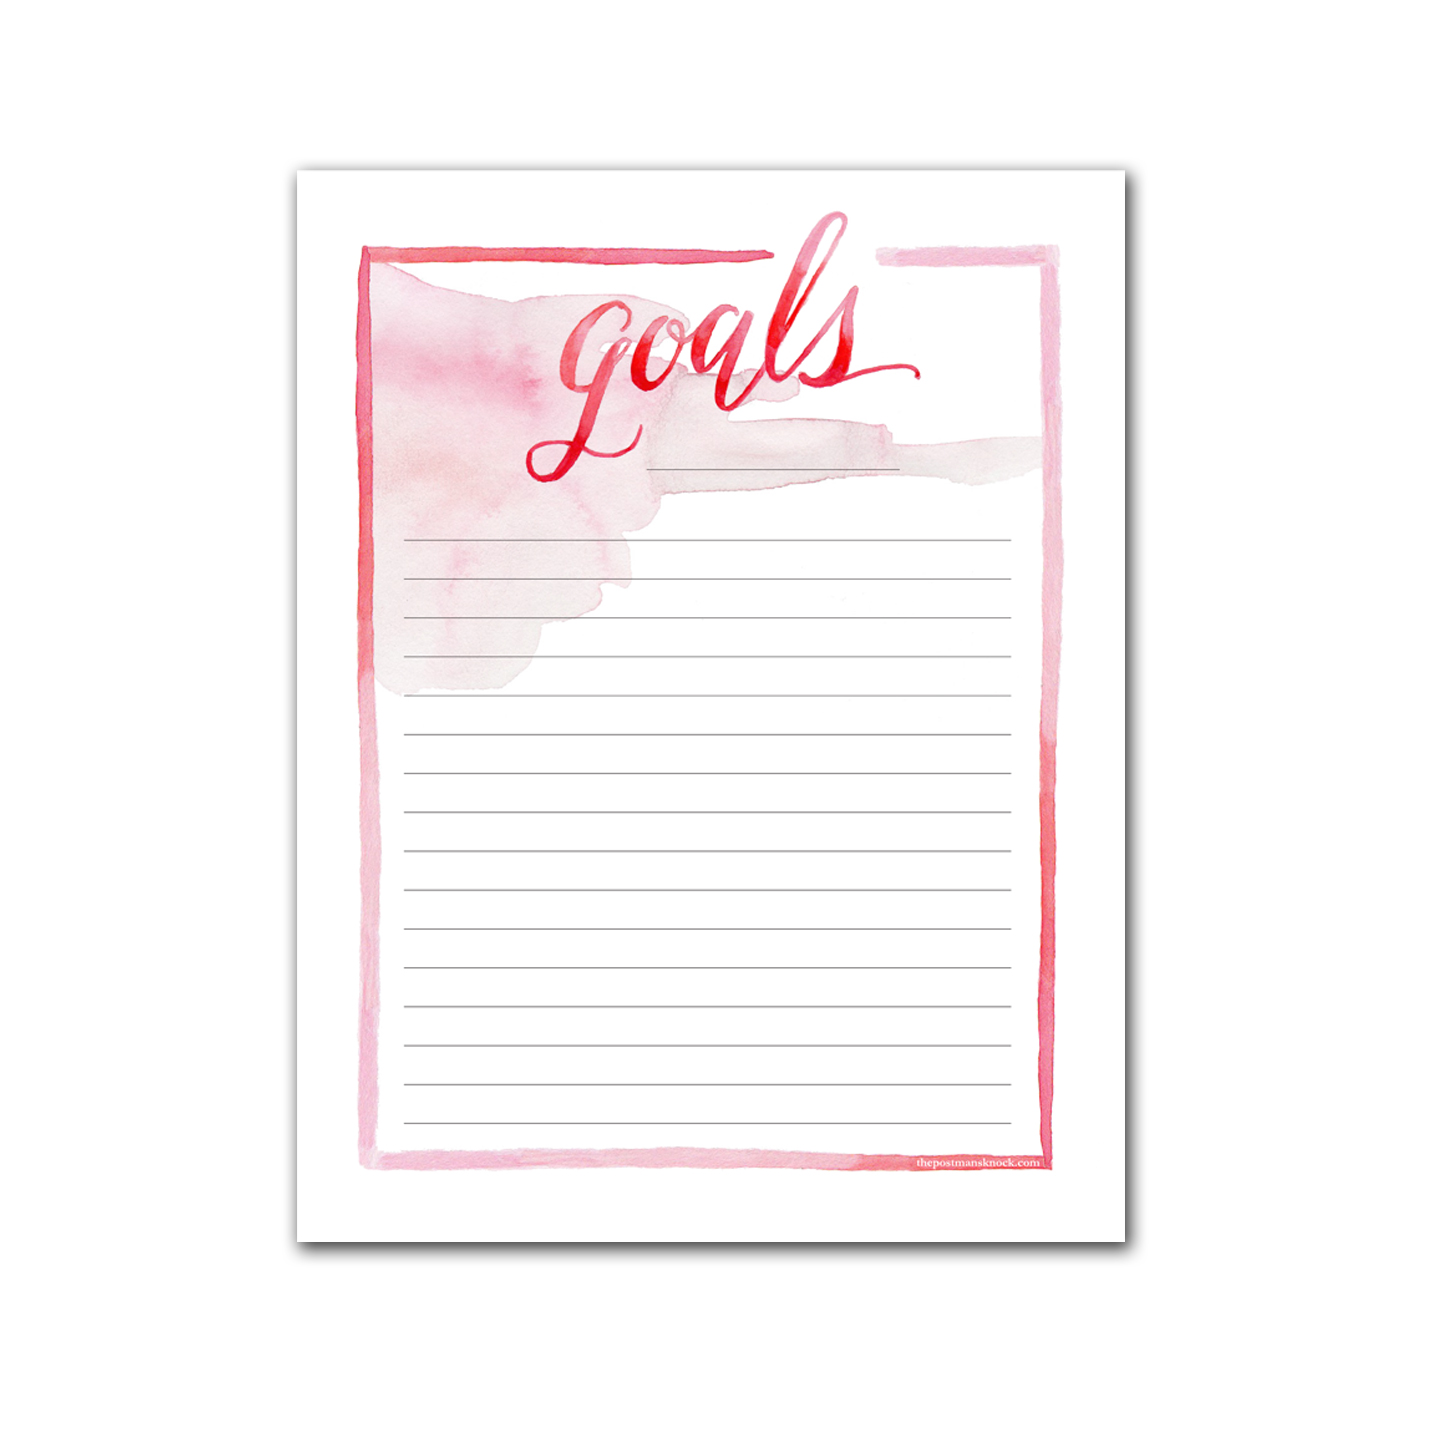 Printable Goal List {Ombre Watercolor} The Postman #39 s Knock